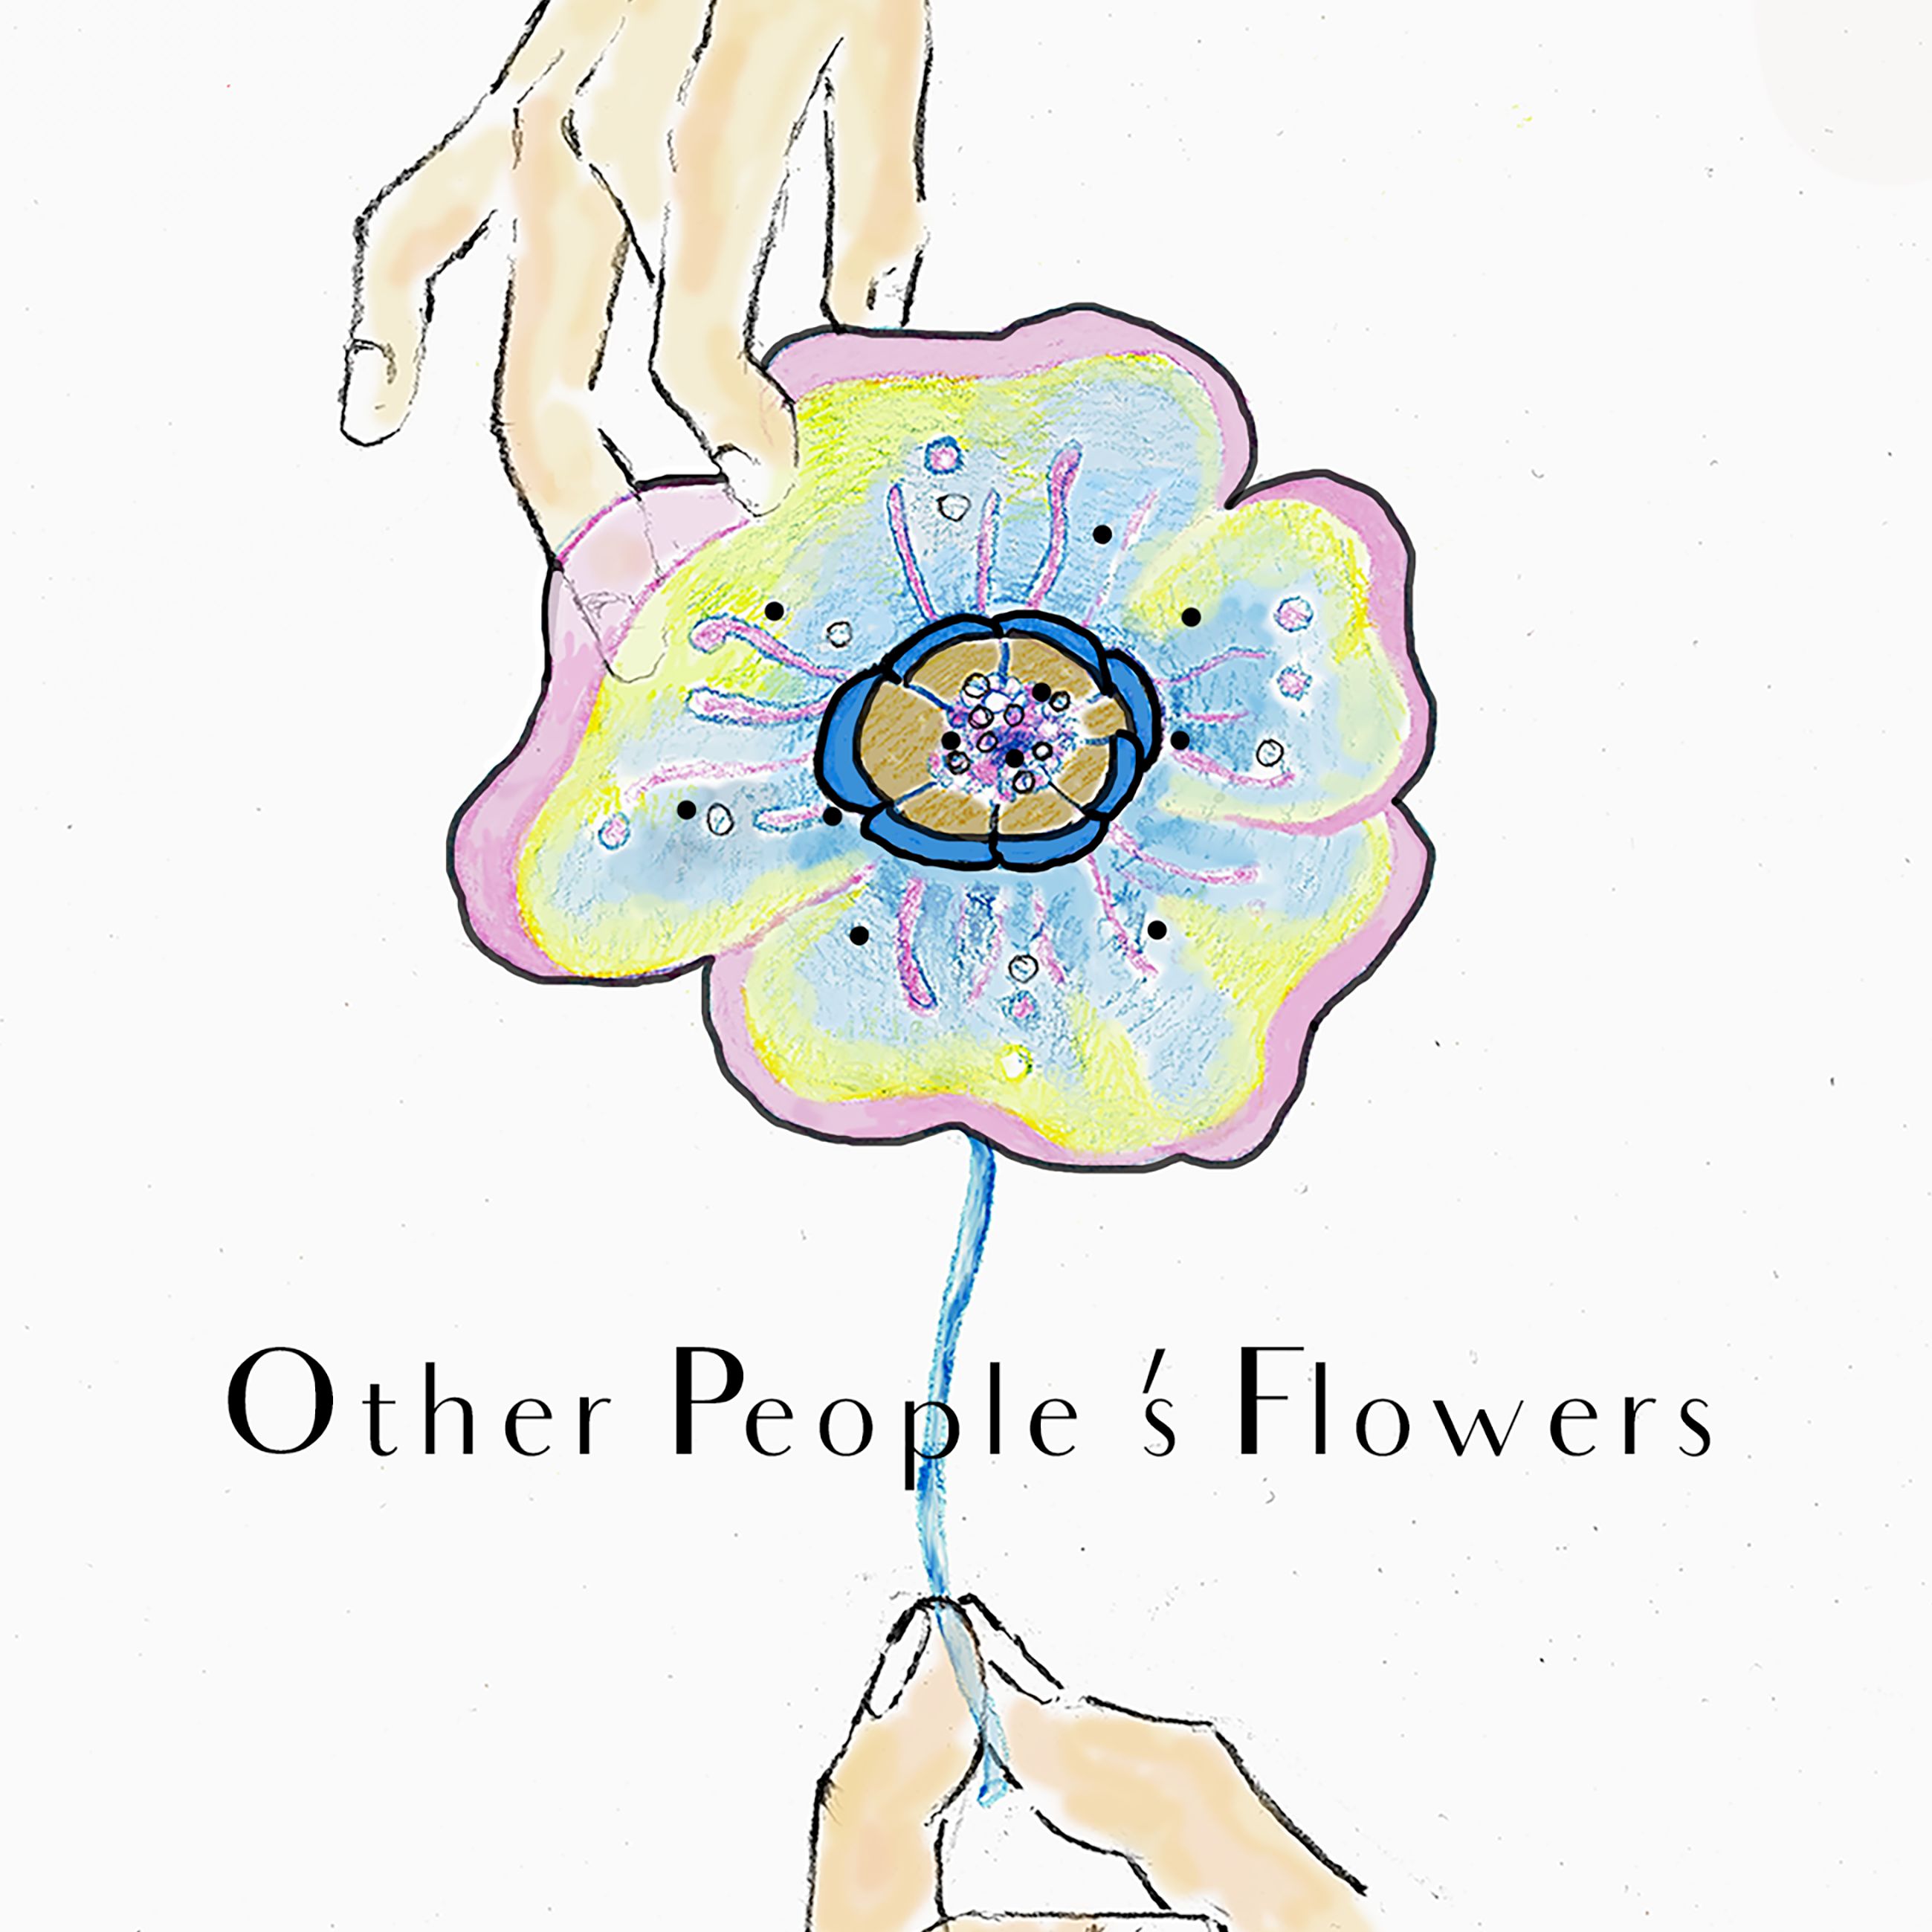 Other People's Flowers